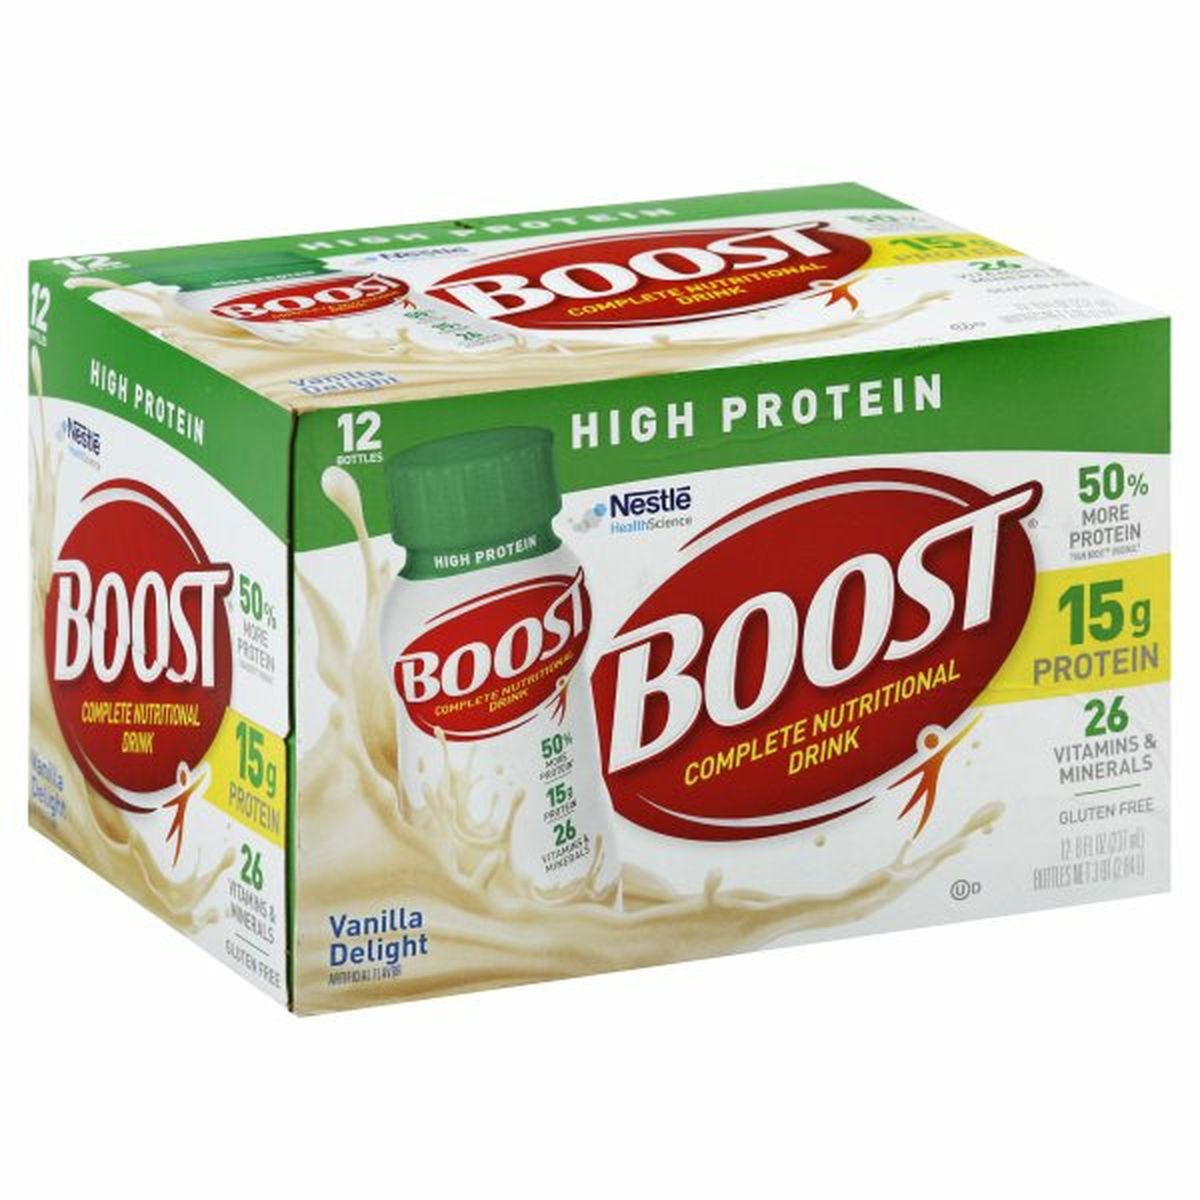 Calories in Boost High Protein Nutritional Drink, Complete, Vanilla Delight